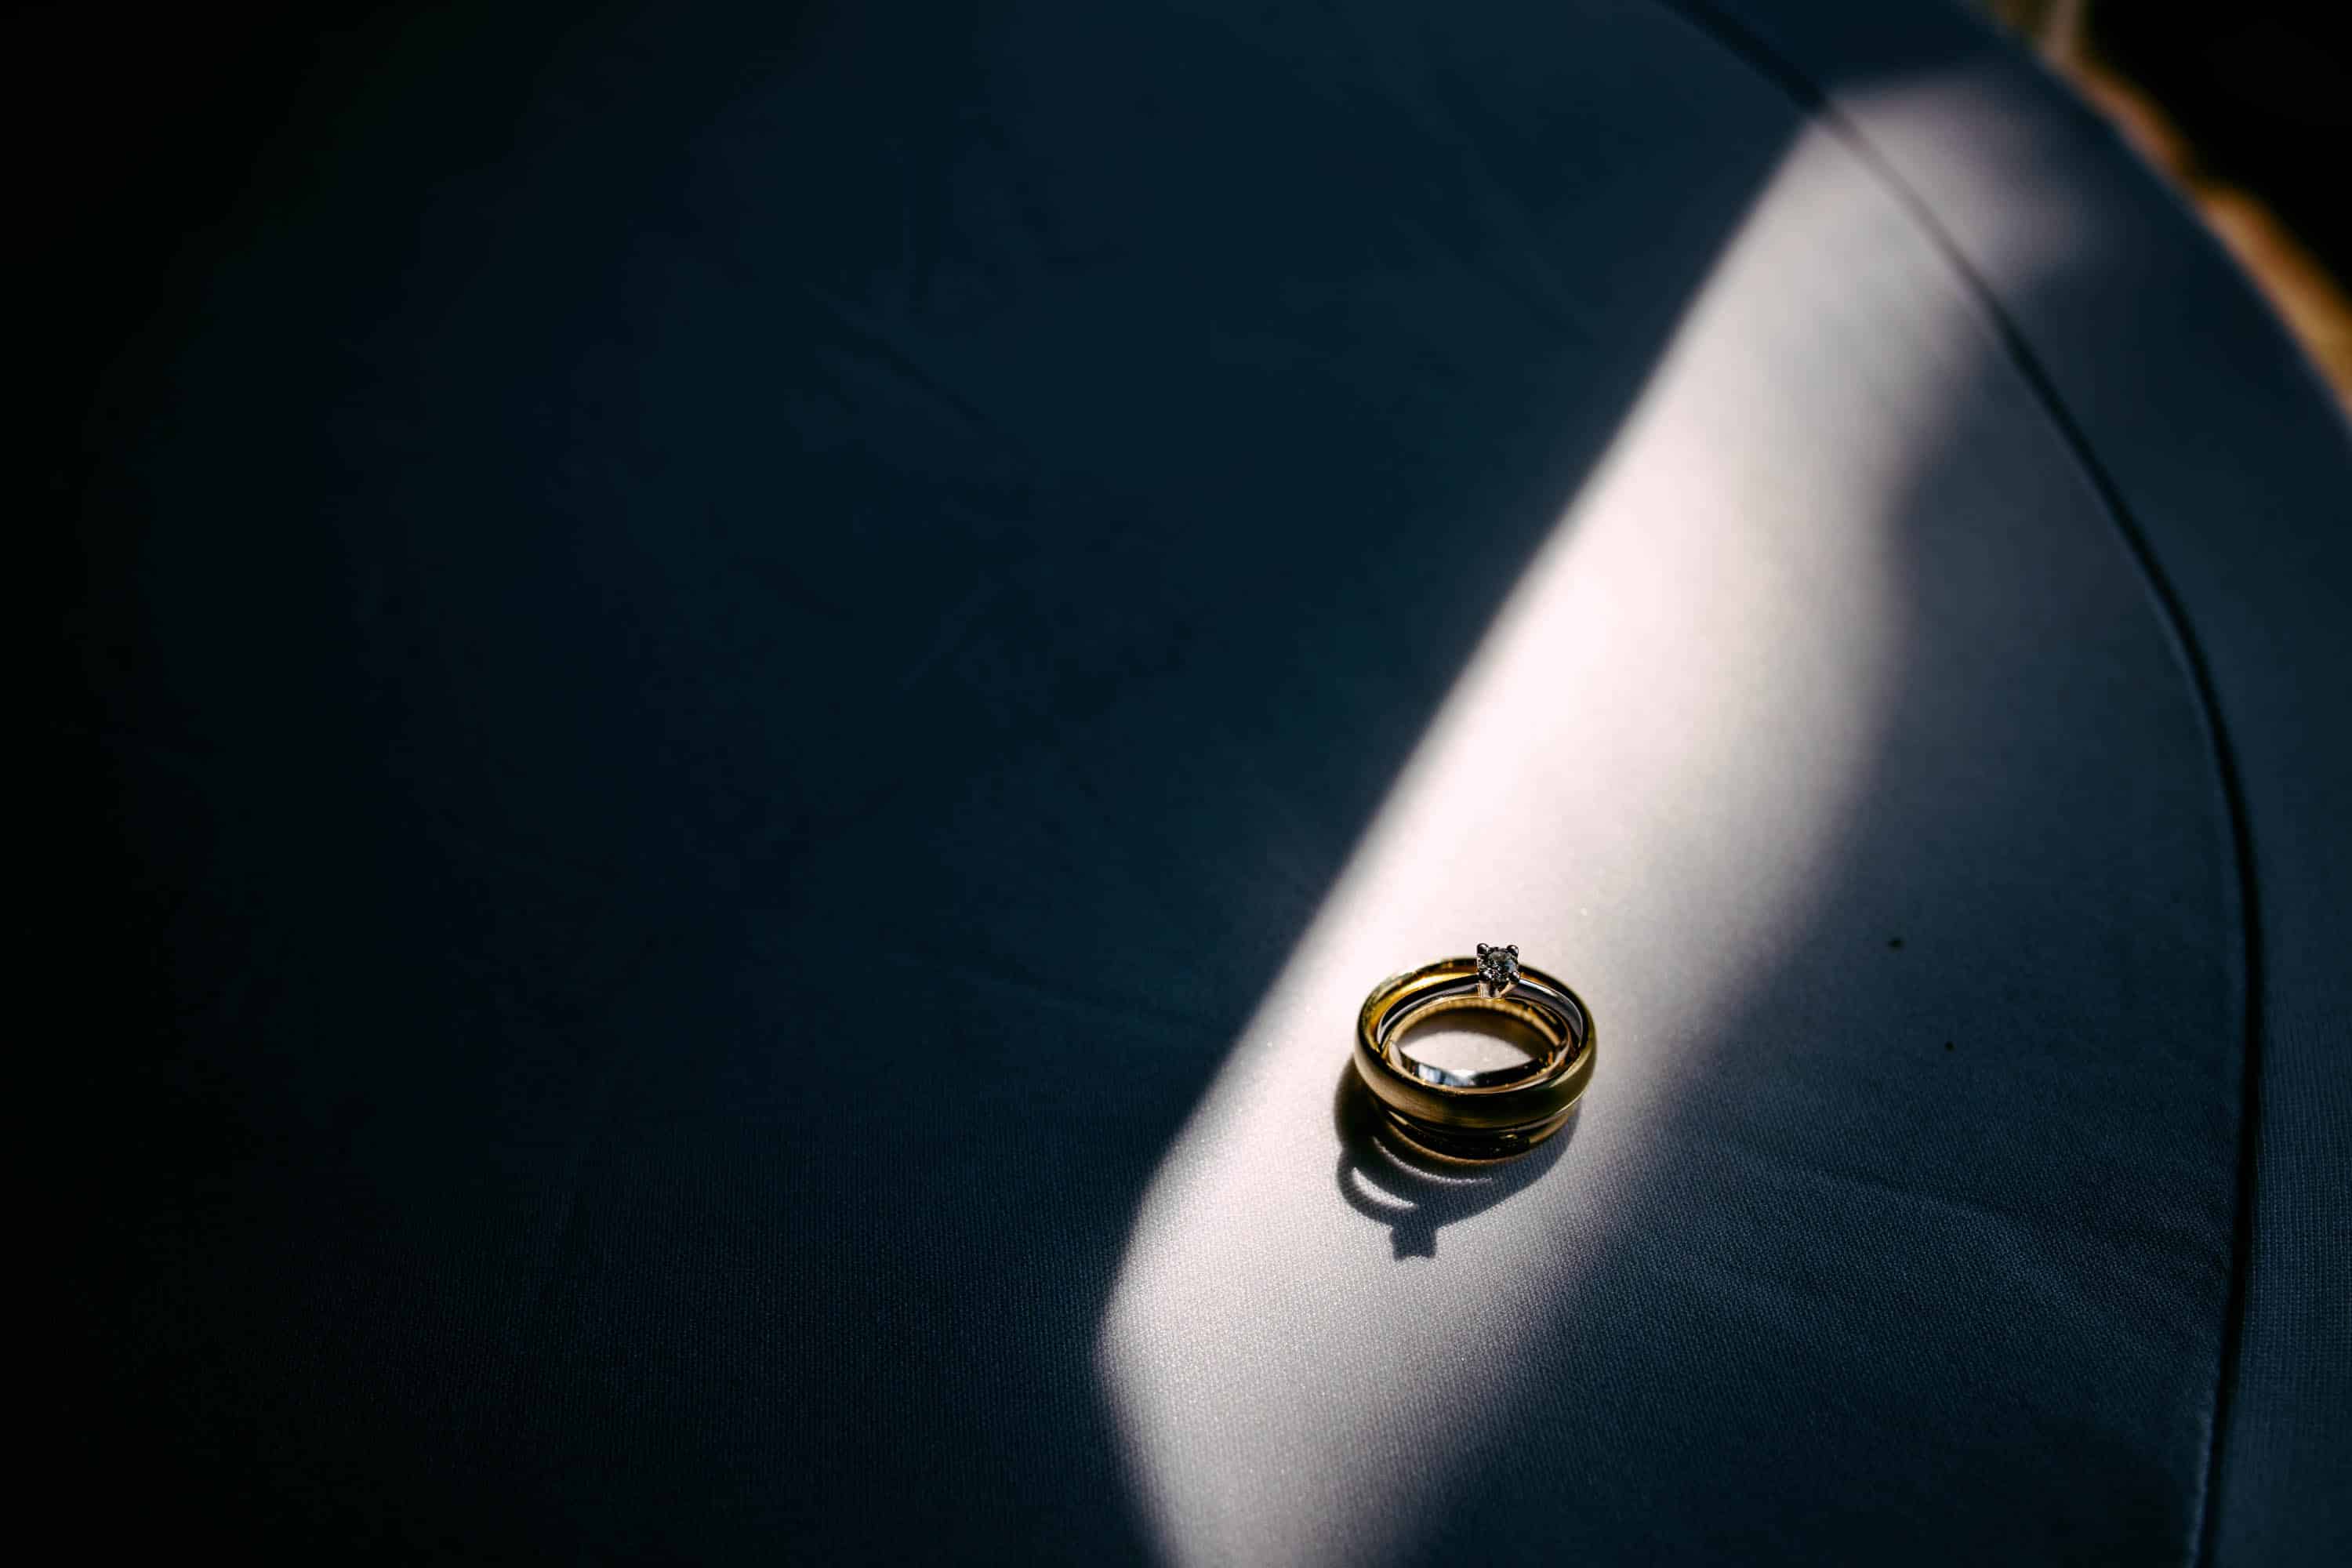 On a bed lies a wedding ring.